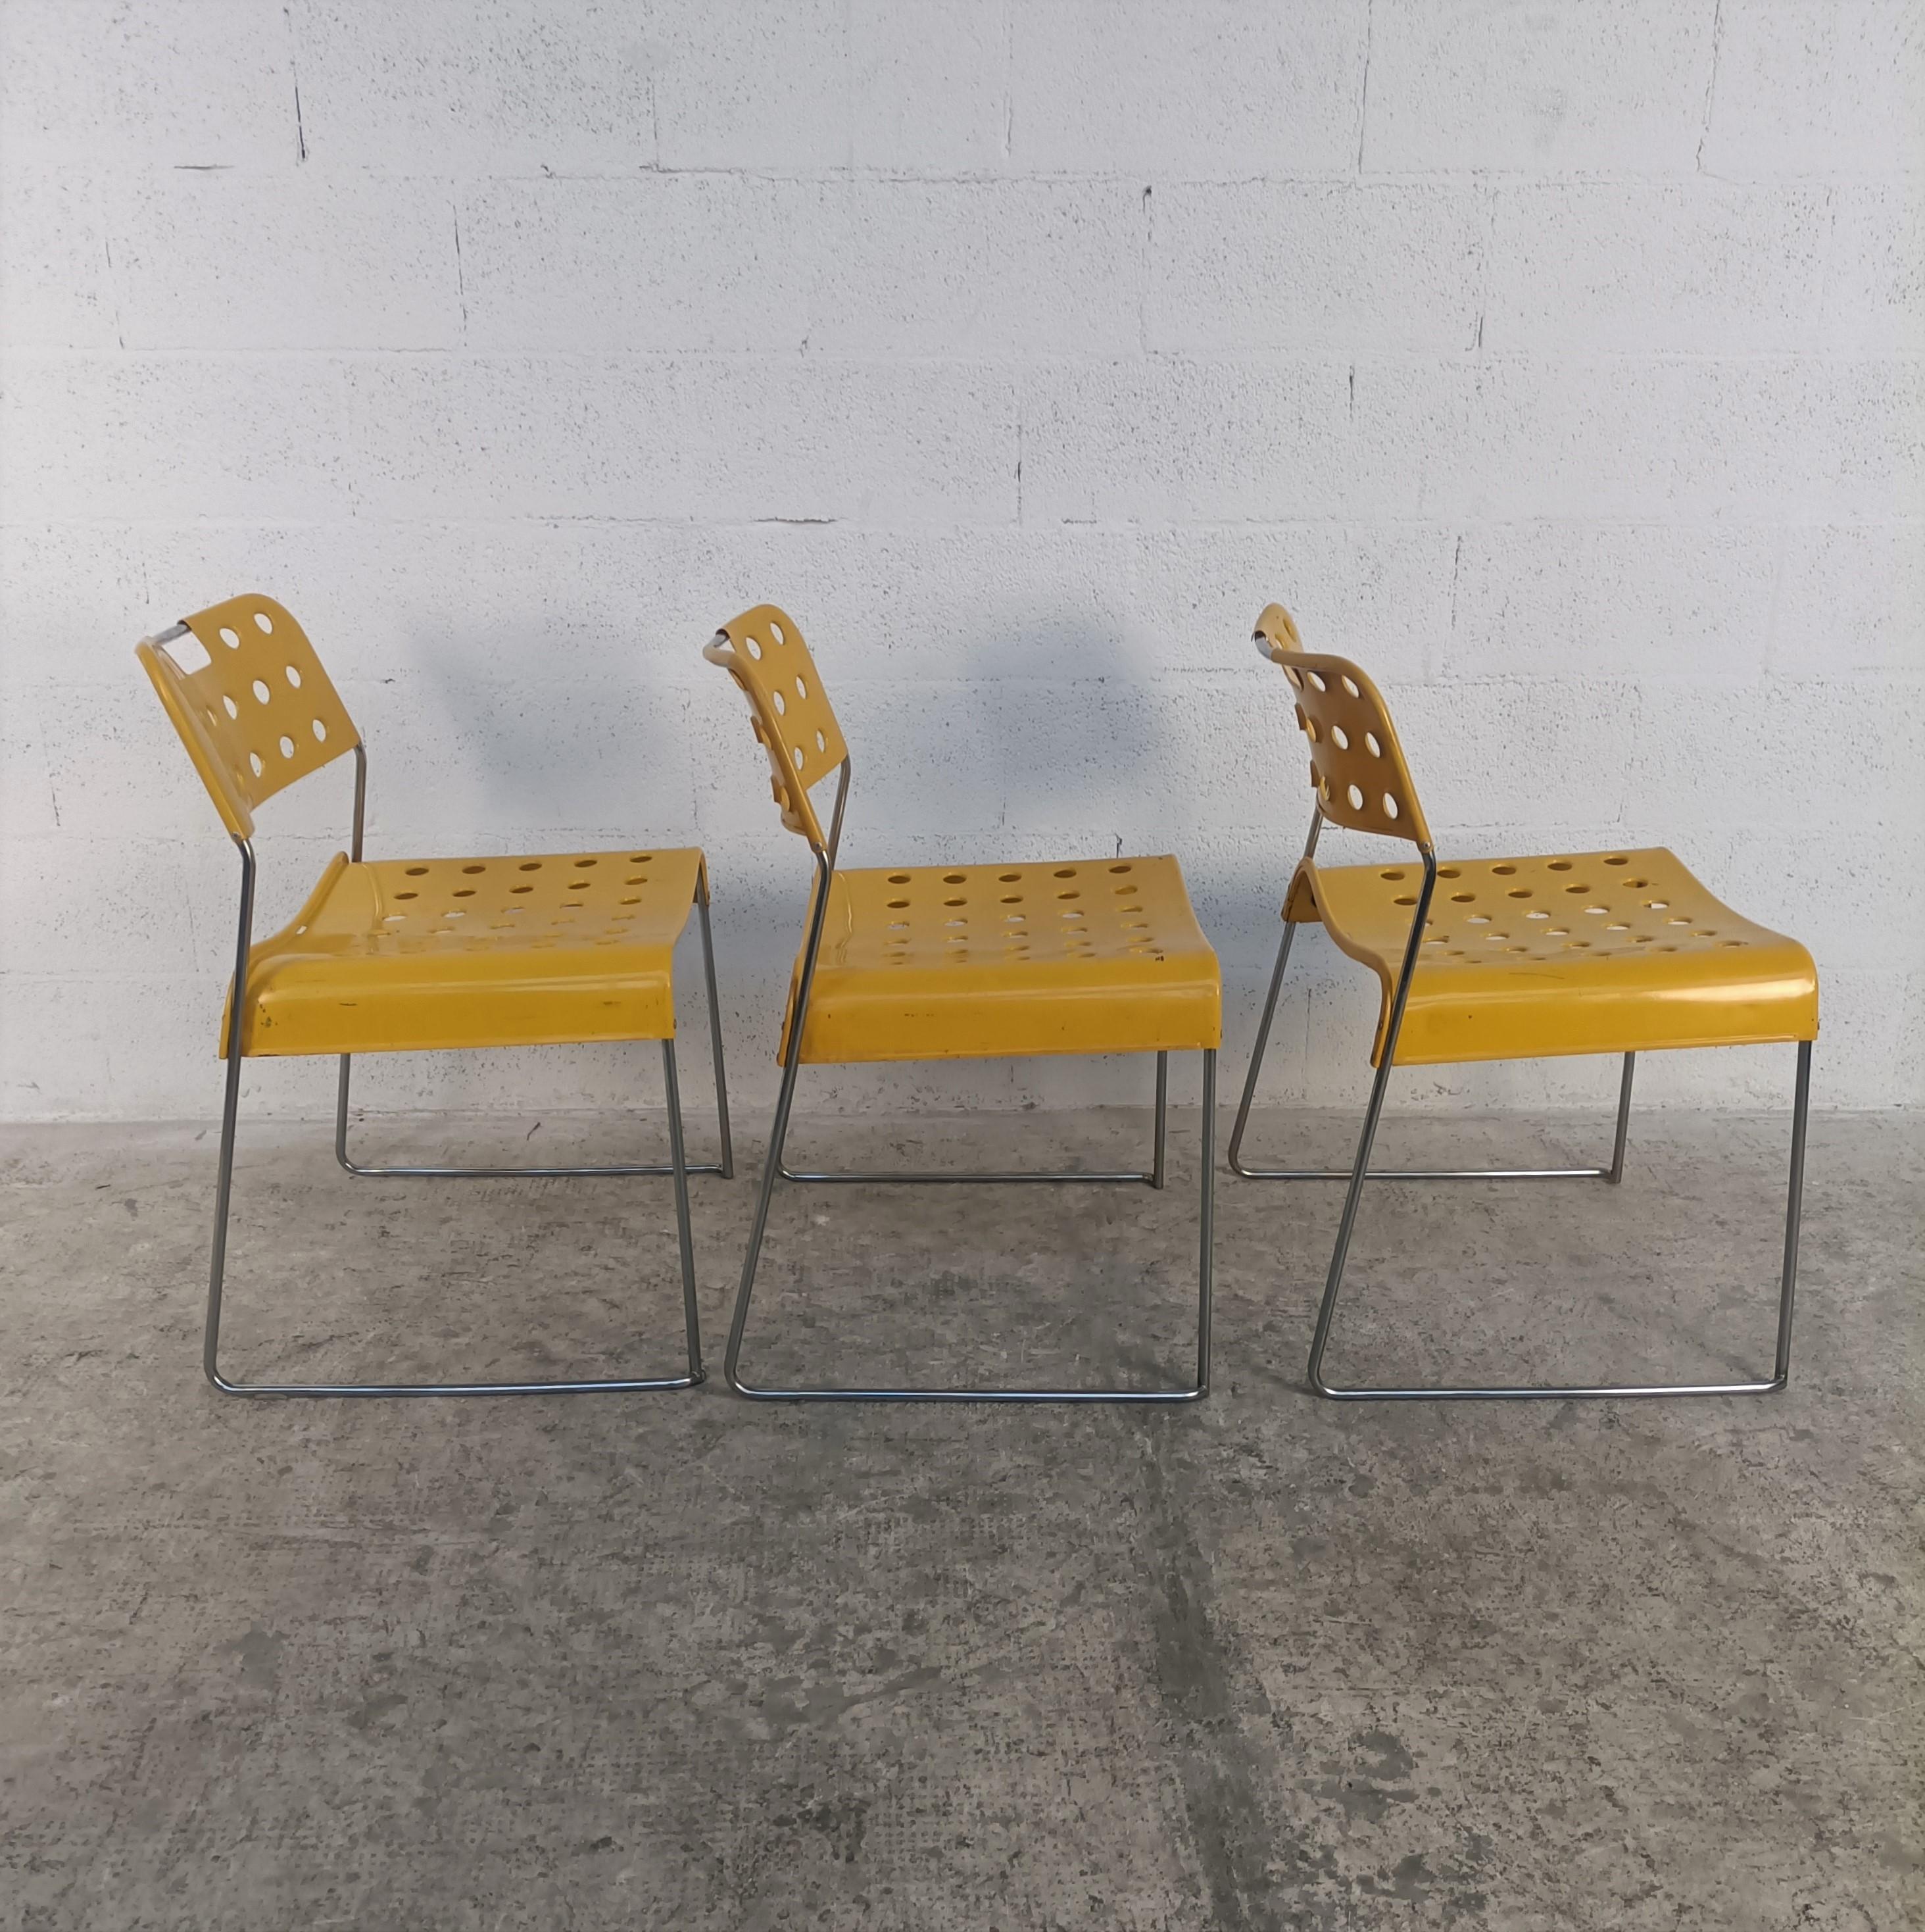 3 Metal dining chairs model Omkstak designed by Rodney Kinsman and produced by Bieffeplast 1970s.
Tubular steel chromed frame, seat and back rest of moulded sheet steel coated with yellow epoxy resin. The perforated details make the chair more